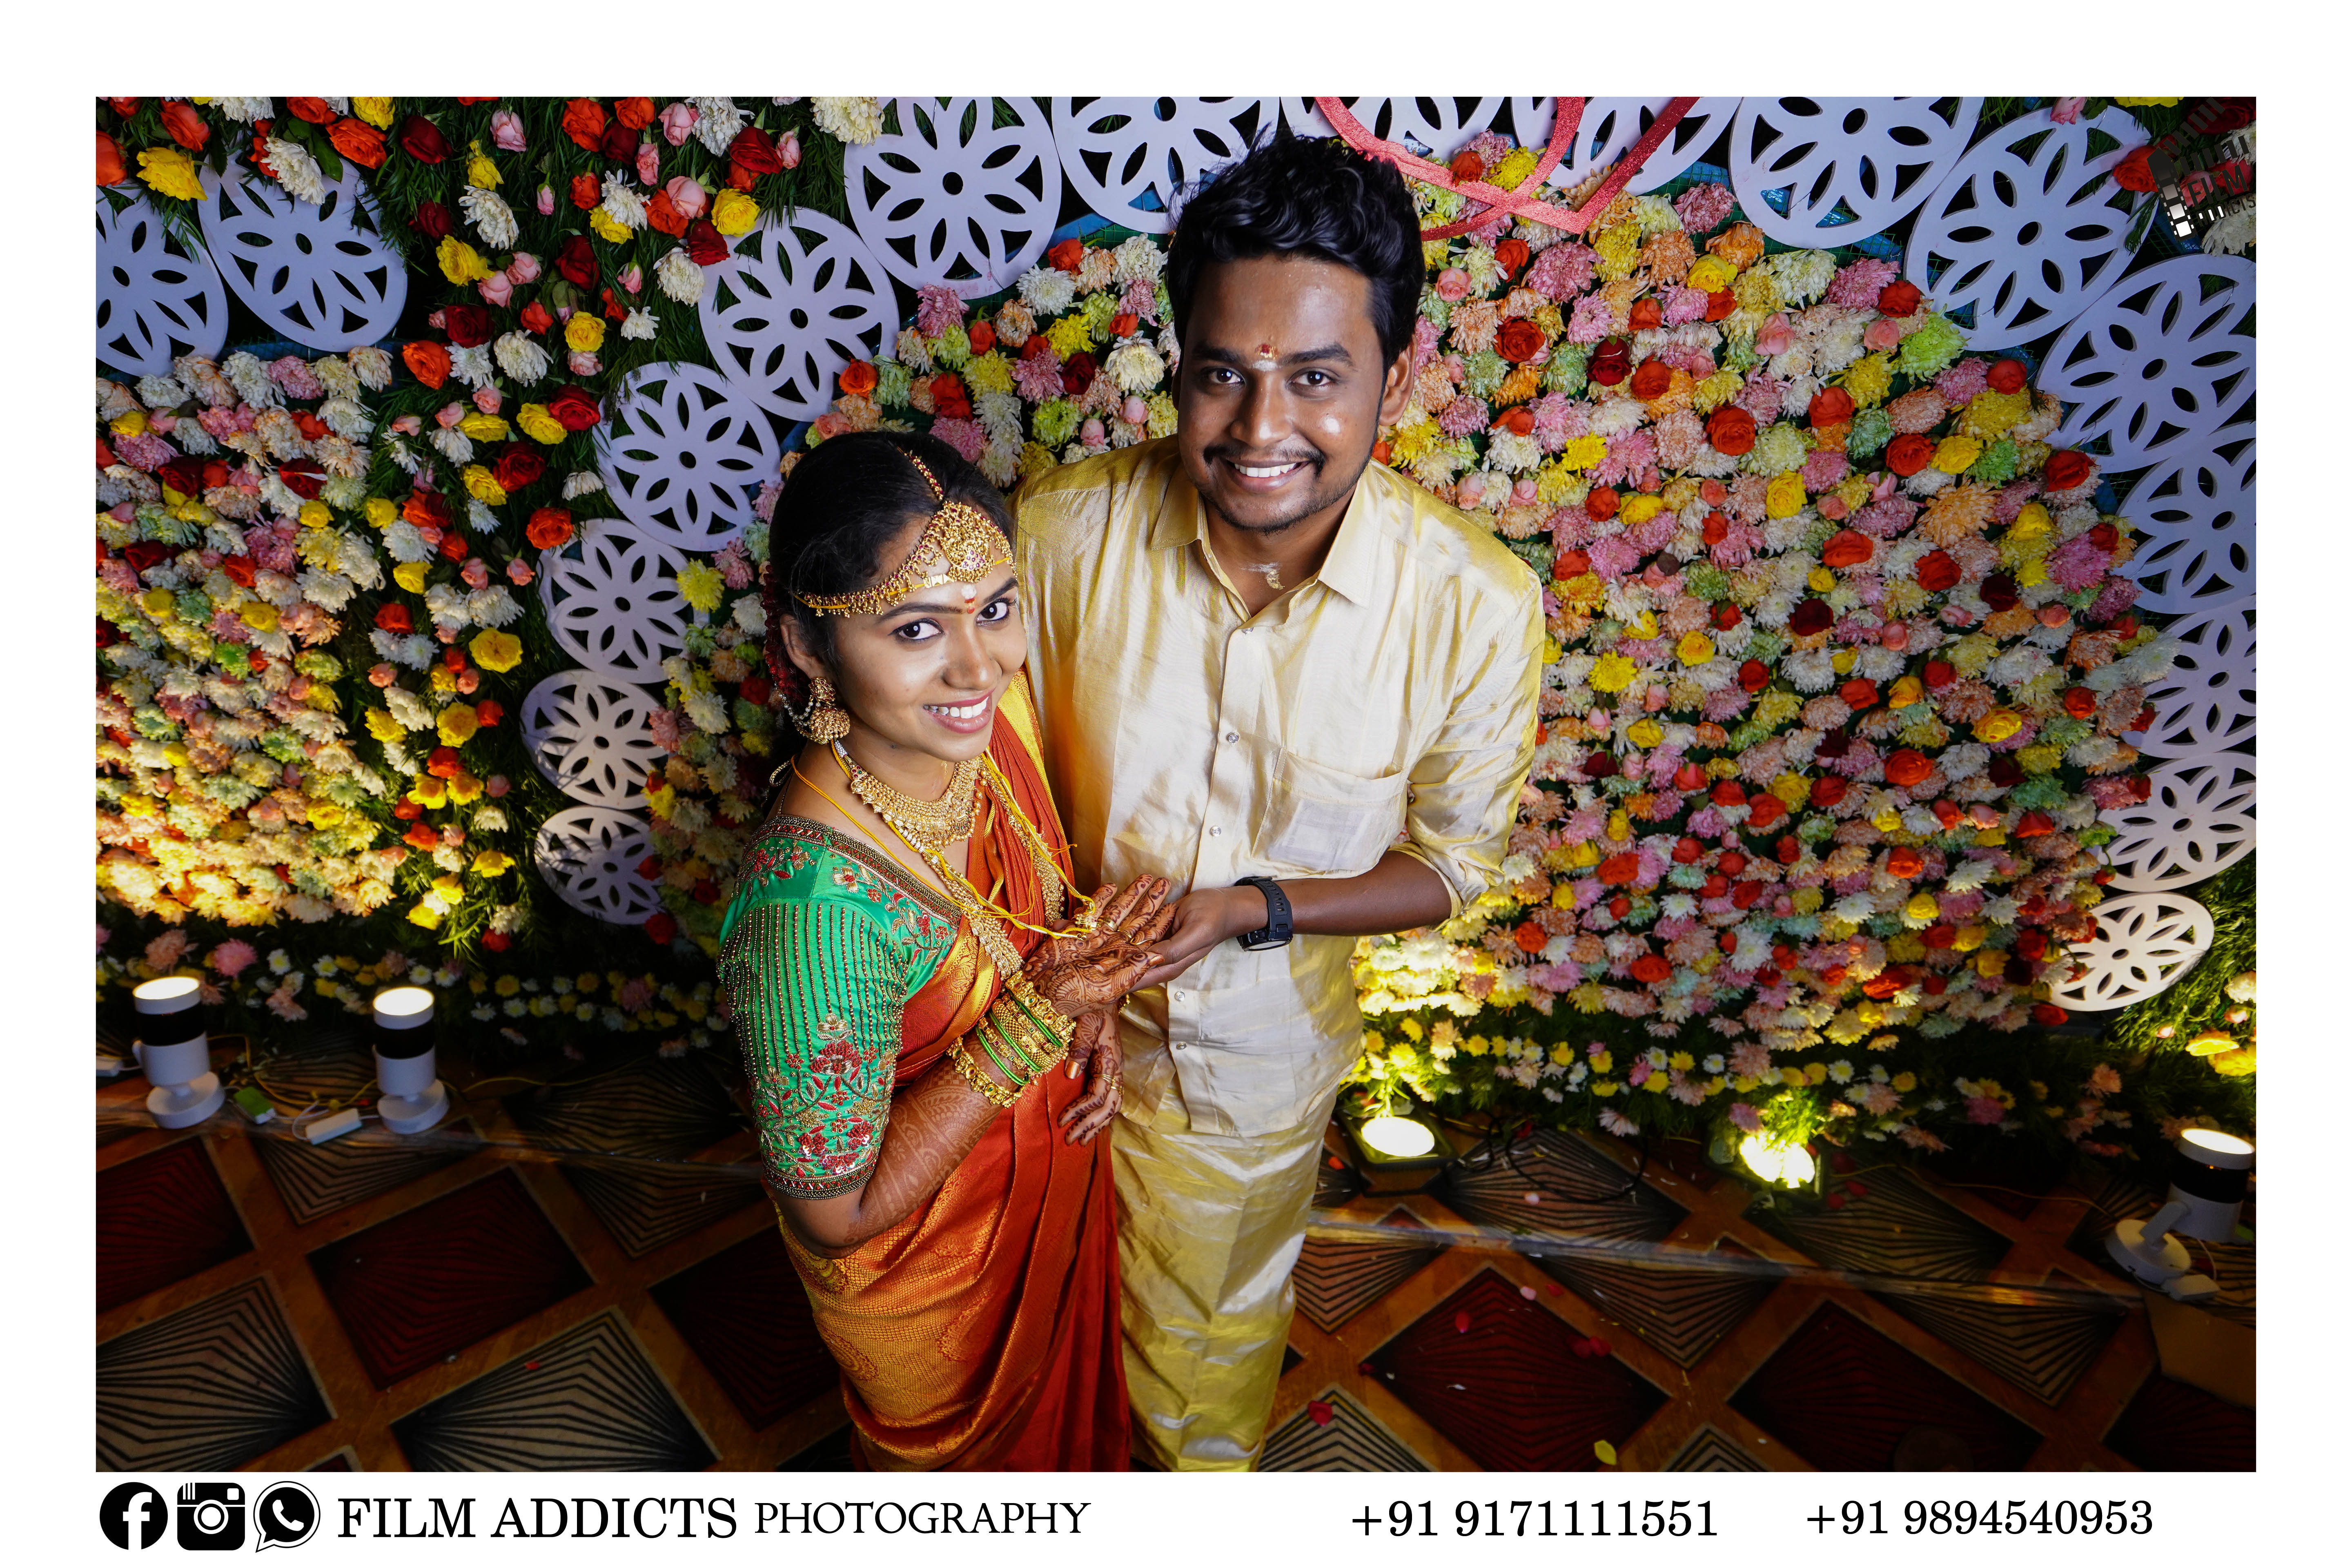 Best Wedding Planners in Theni-Filmaddicts Photography,Theni Wedding Planners, Best Wedding Planners in Theni,Wedding Planners in Theni, Best Wedding Photographers in Theni-FilmAddicts Photography, Best candid photographers in Theni, Best Wedding Candid photographers in Theni, Wedding Candid Moments, FilmAddicts, Photography, FilmAddictsPhotography, best wedding in Theni, Best Candid shoot in Theni, best moment, Best wedding moments, Best wedding photography in Theni, Best wedding videography in Theni, Best couple shoot, Best candid, Best wedding shoot, Best wedding candid, best marraige photographers in Theni, best marraige photography in Theni, best candid photography, best Theni photography, Theni, Theni photography, Theni couples, candid shoot, candid, tamilnadu wedding photography, best photographers in Theni, tamilnadu